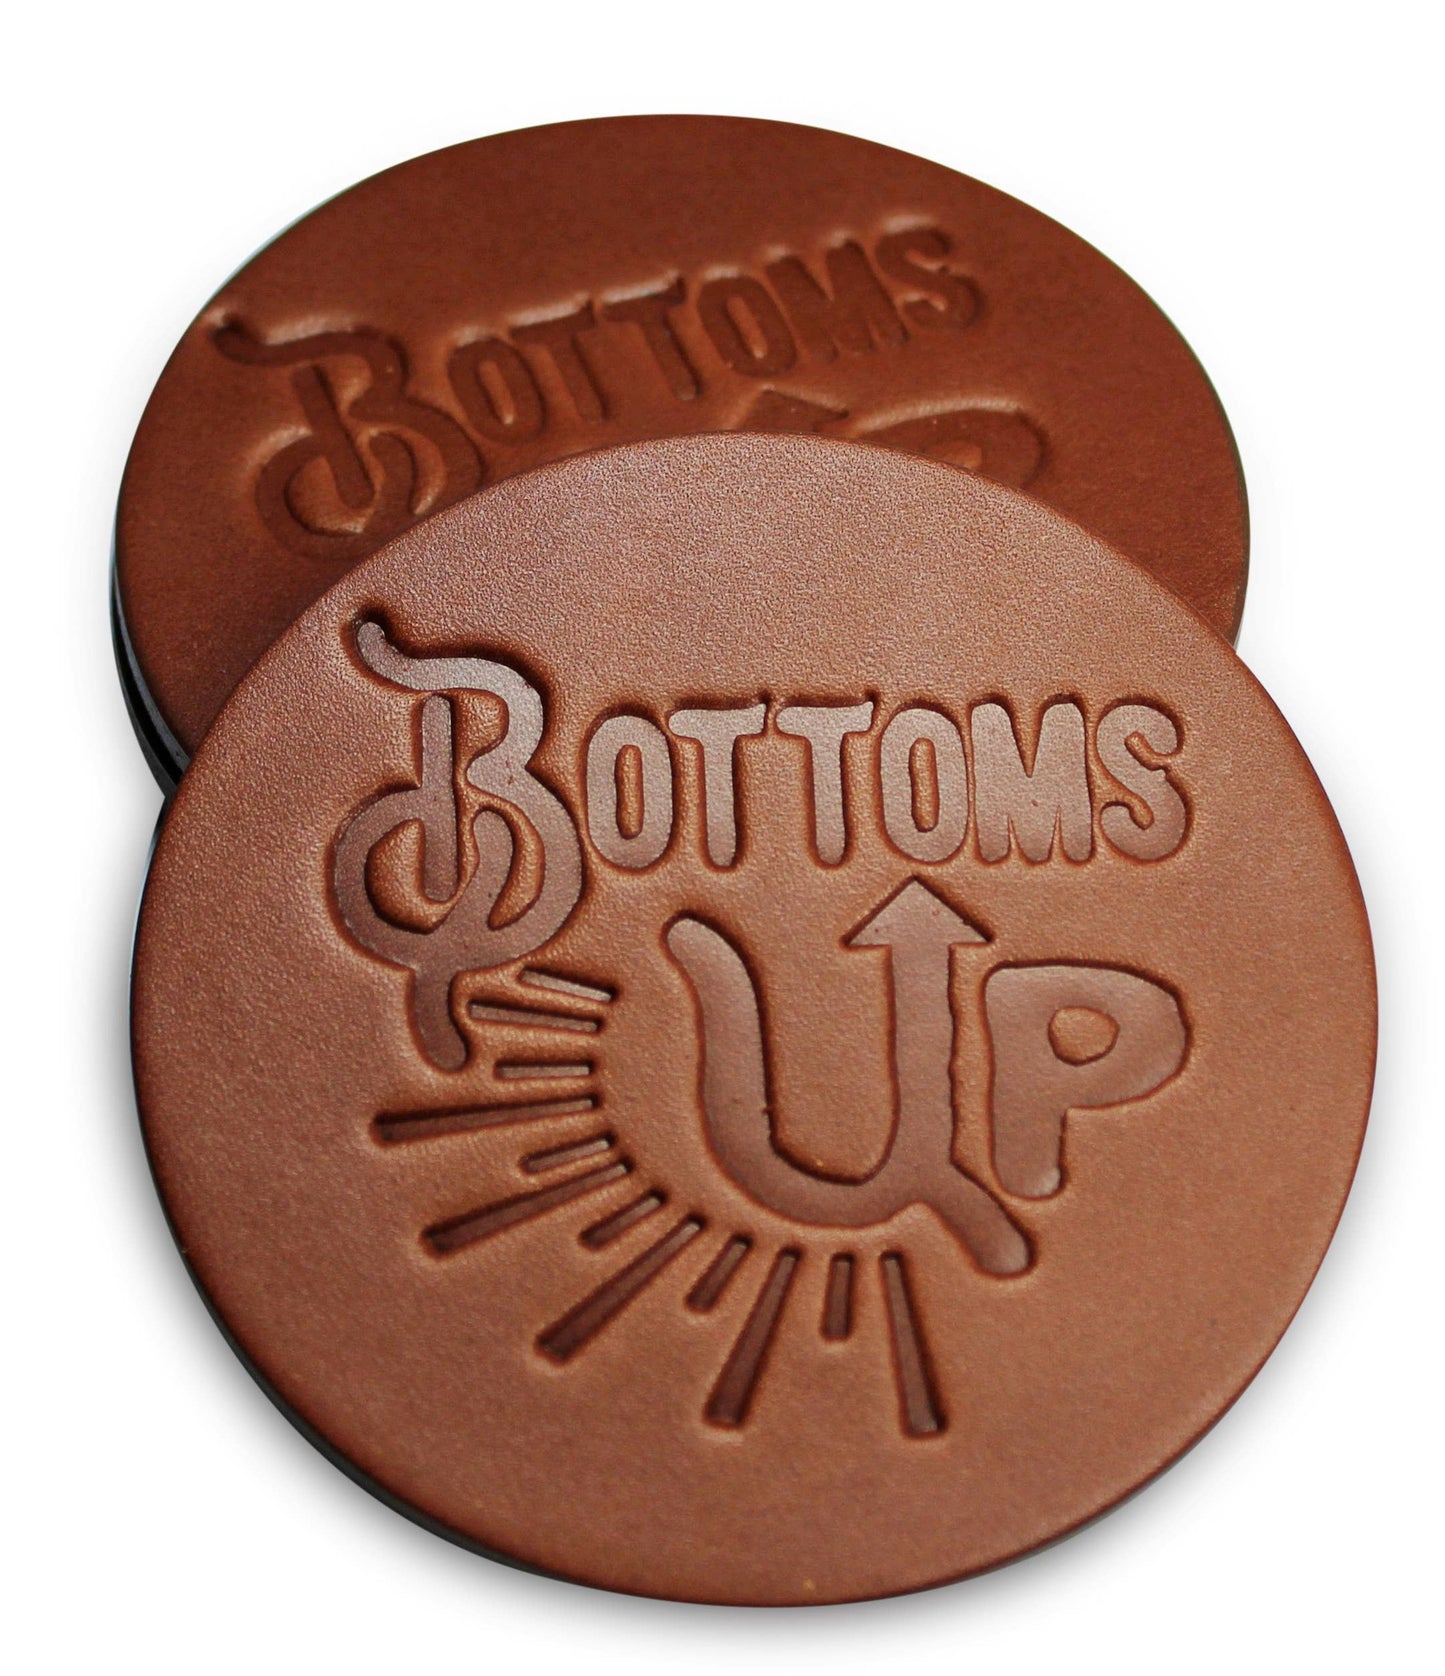 "Bottoms Up" Leather Coasters Set of 4